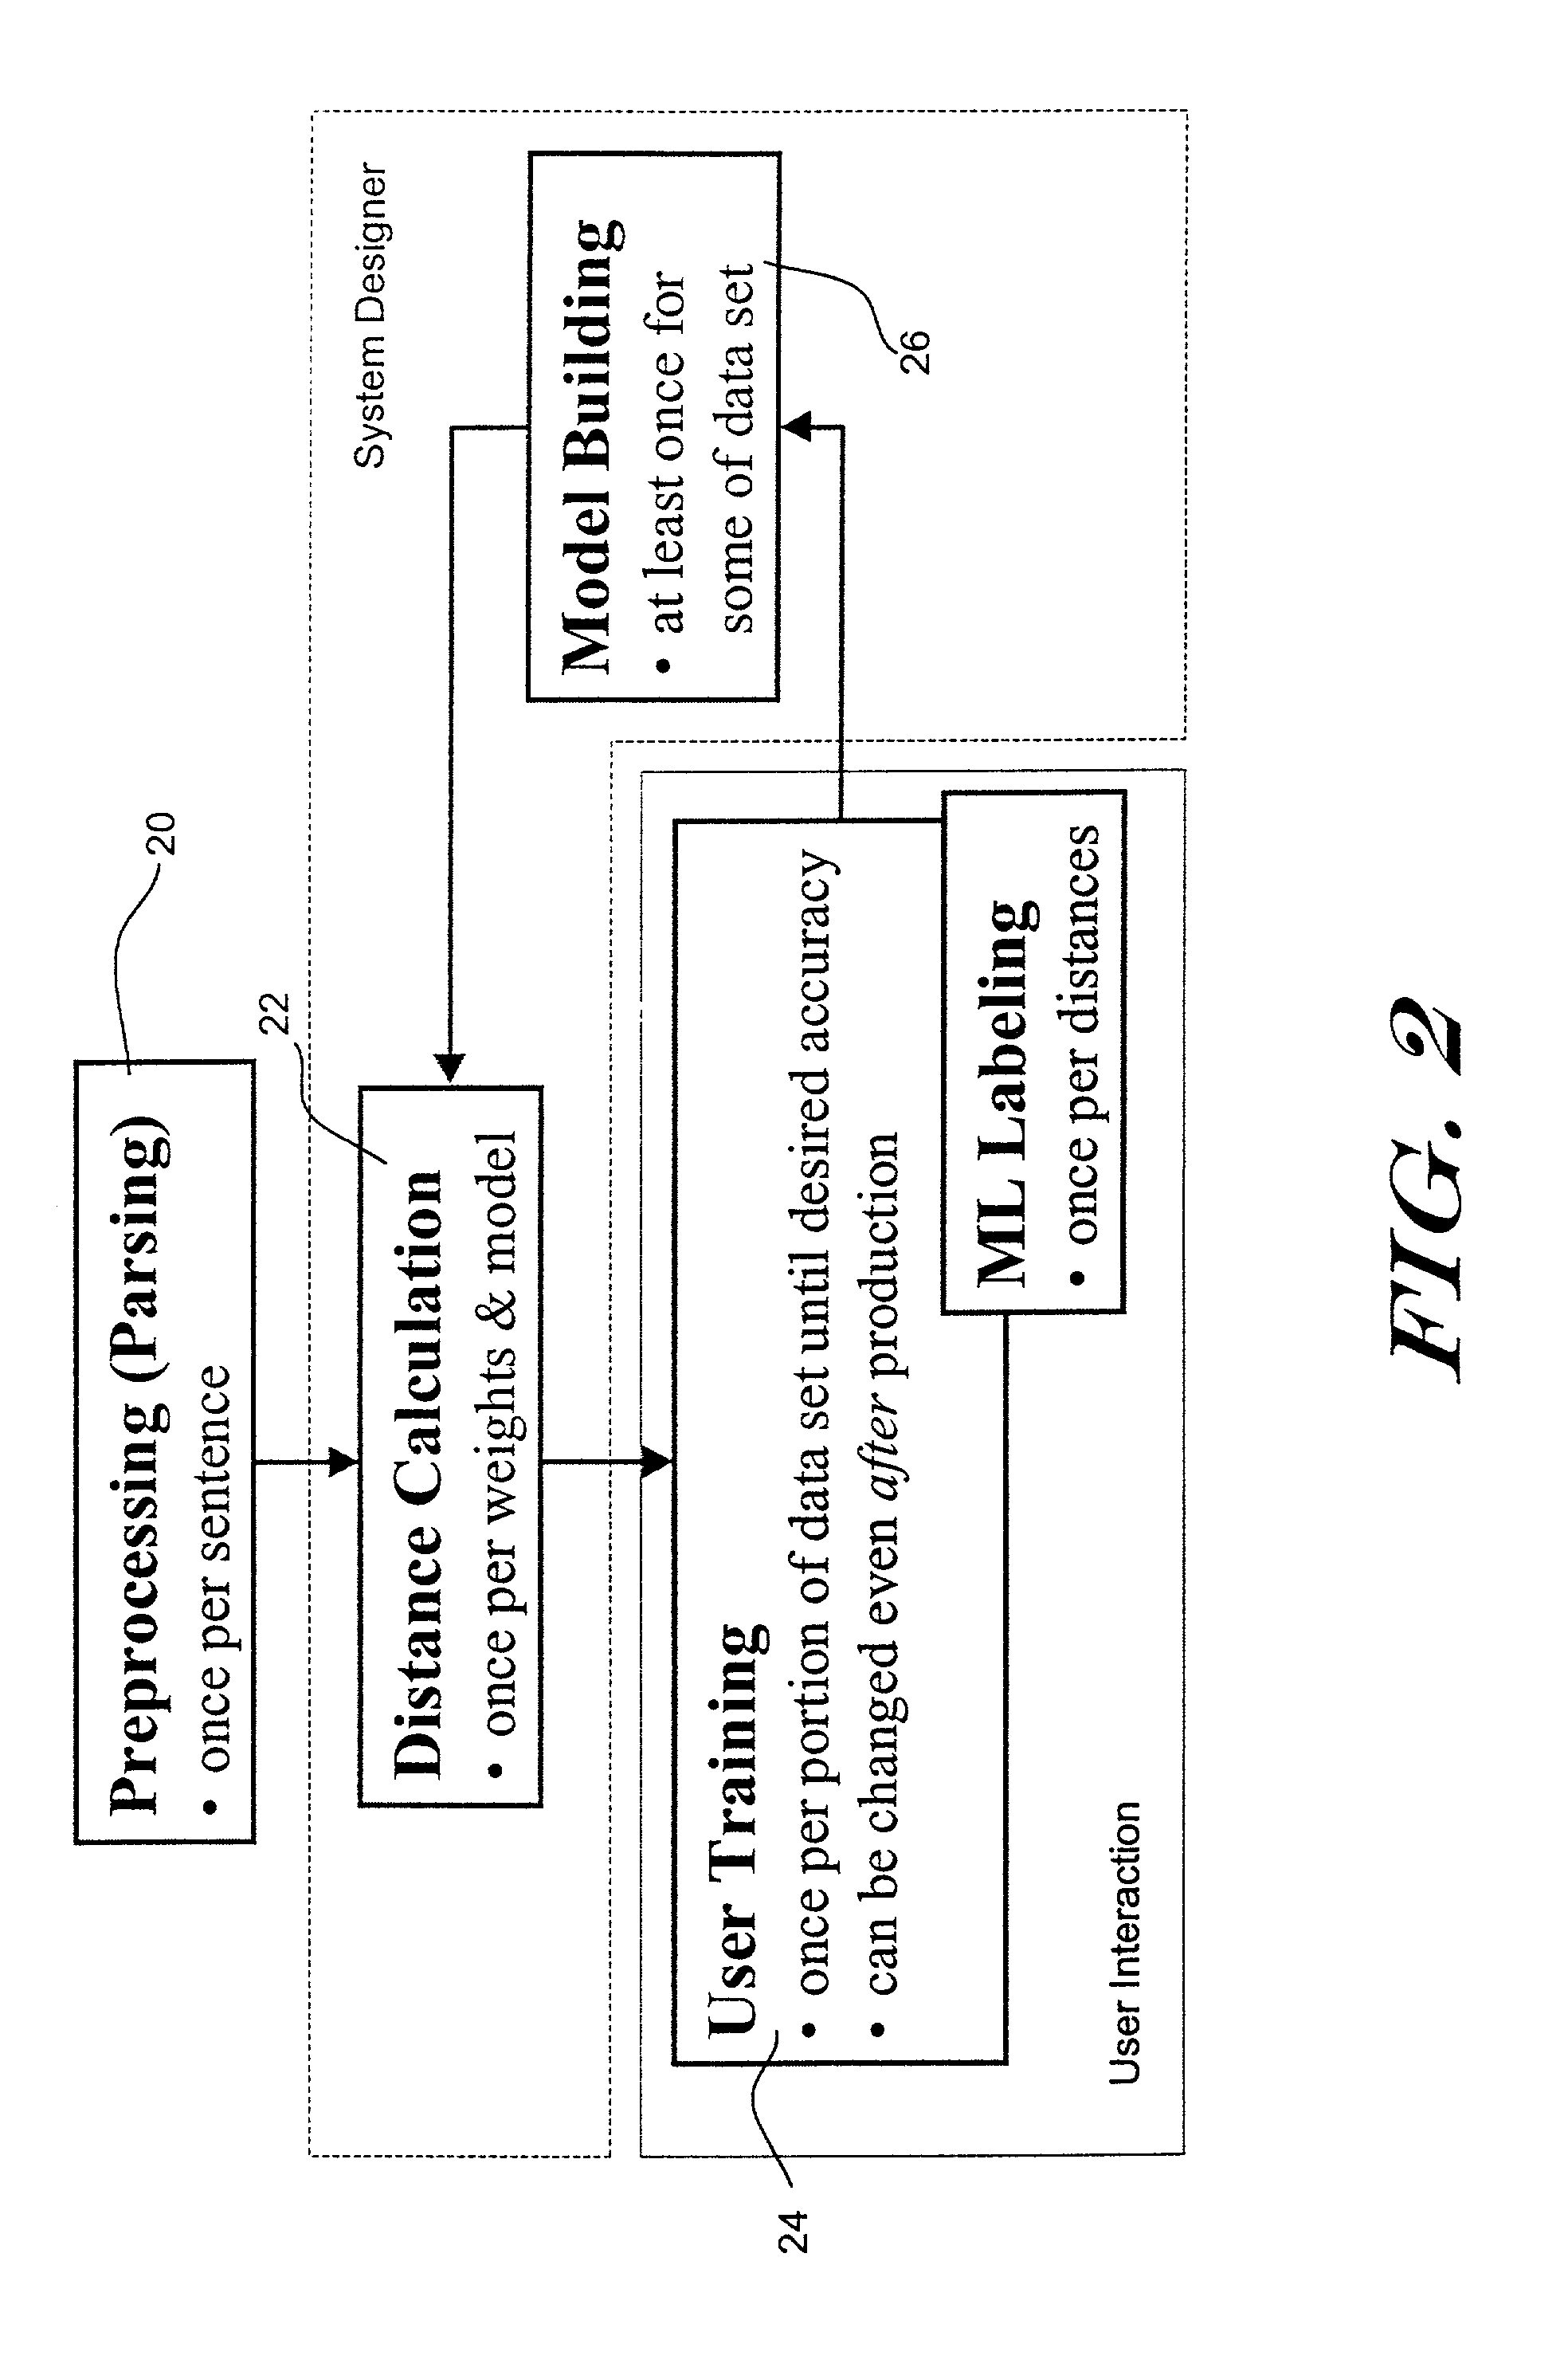 Method and apparatus for determining a measure of similarity between natural language sentences